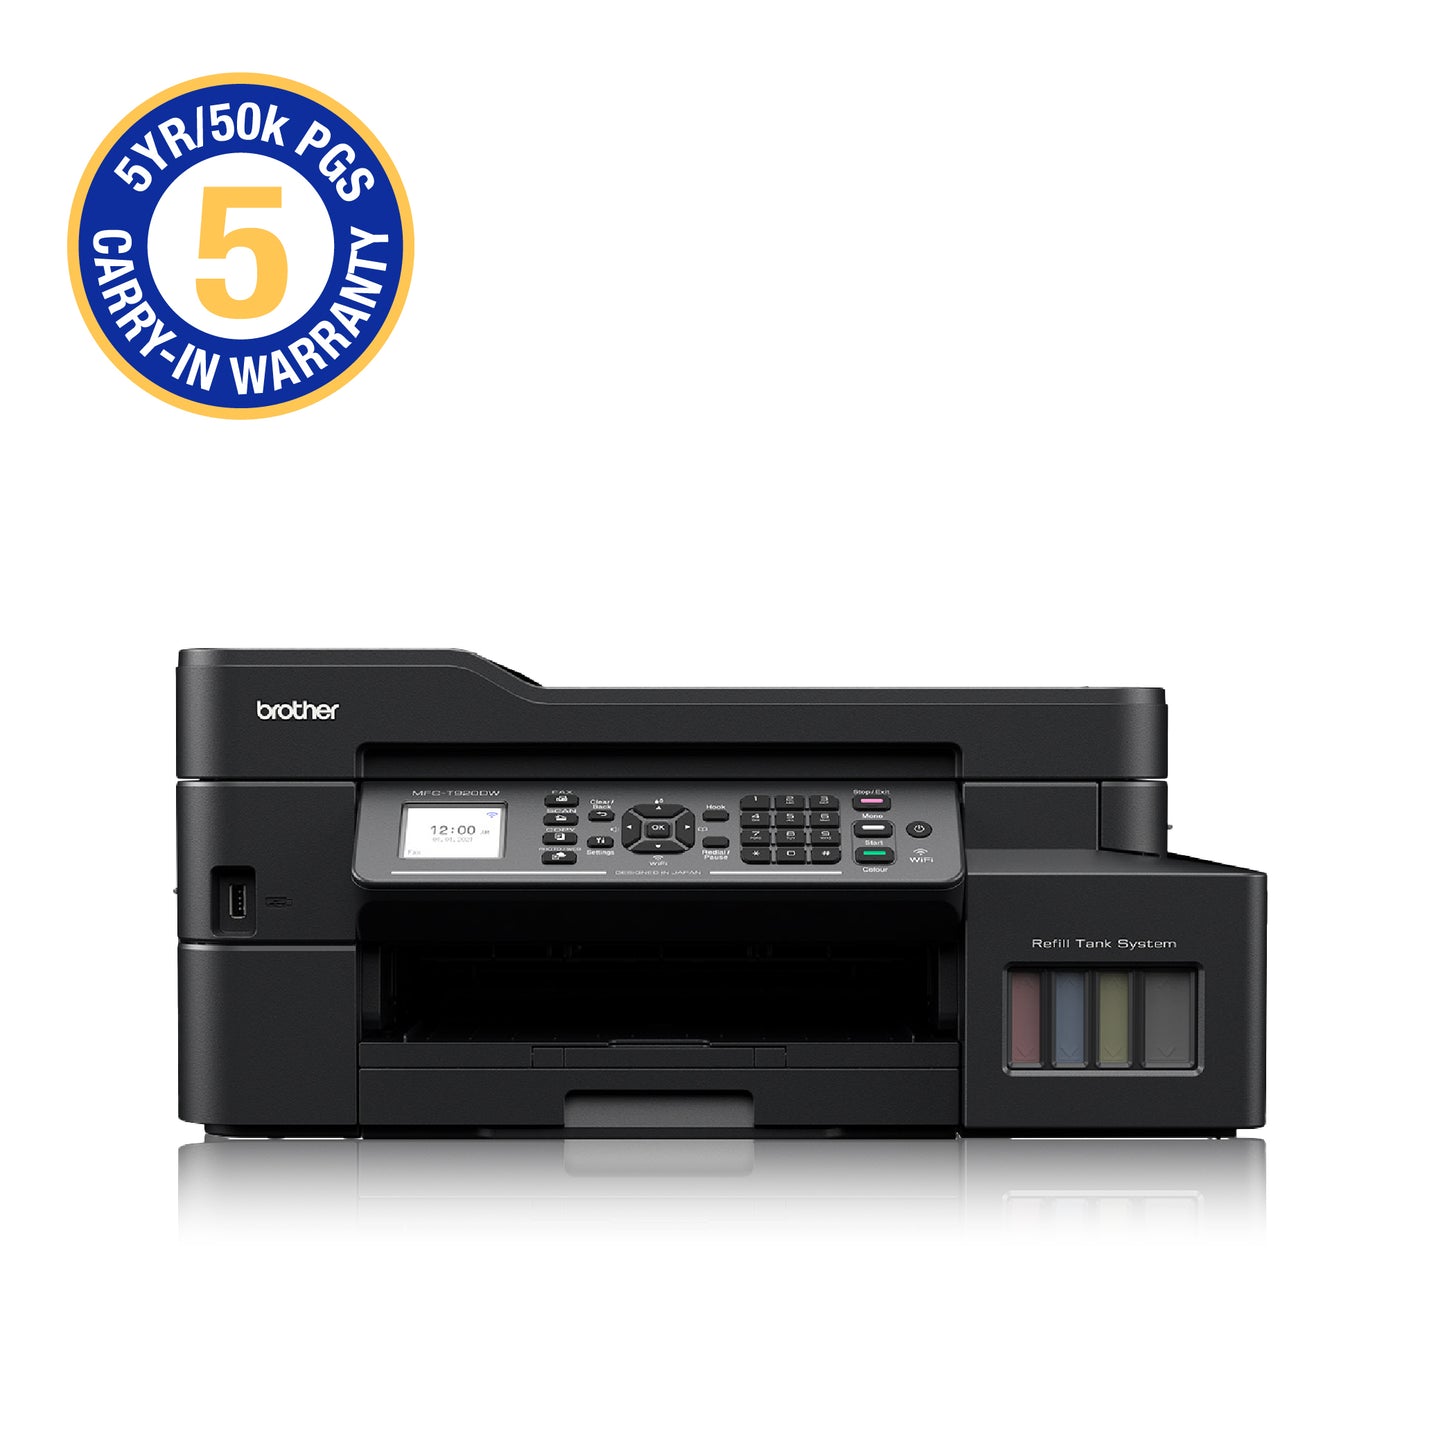 Brother MFC-T920DW Ink Tank Printer 4in1 with WiFi, Ethernet and ADF (includes  HiLo Surge Protector Kit)